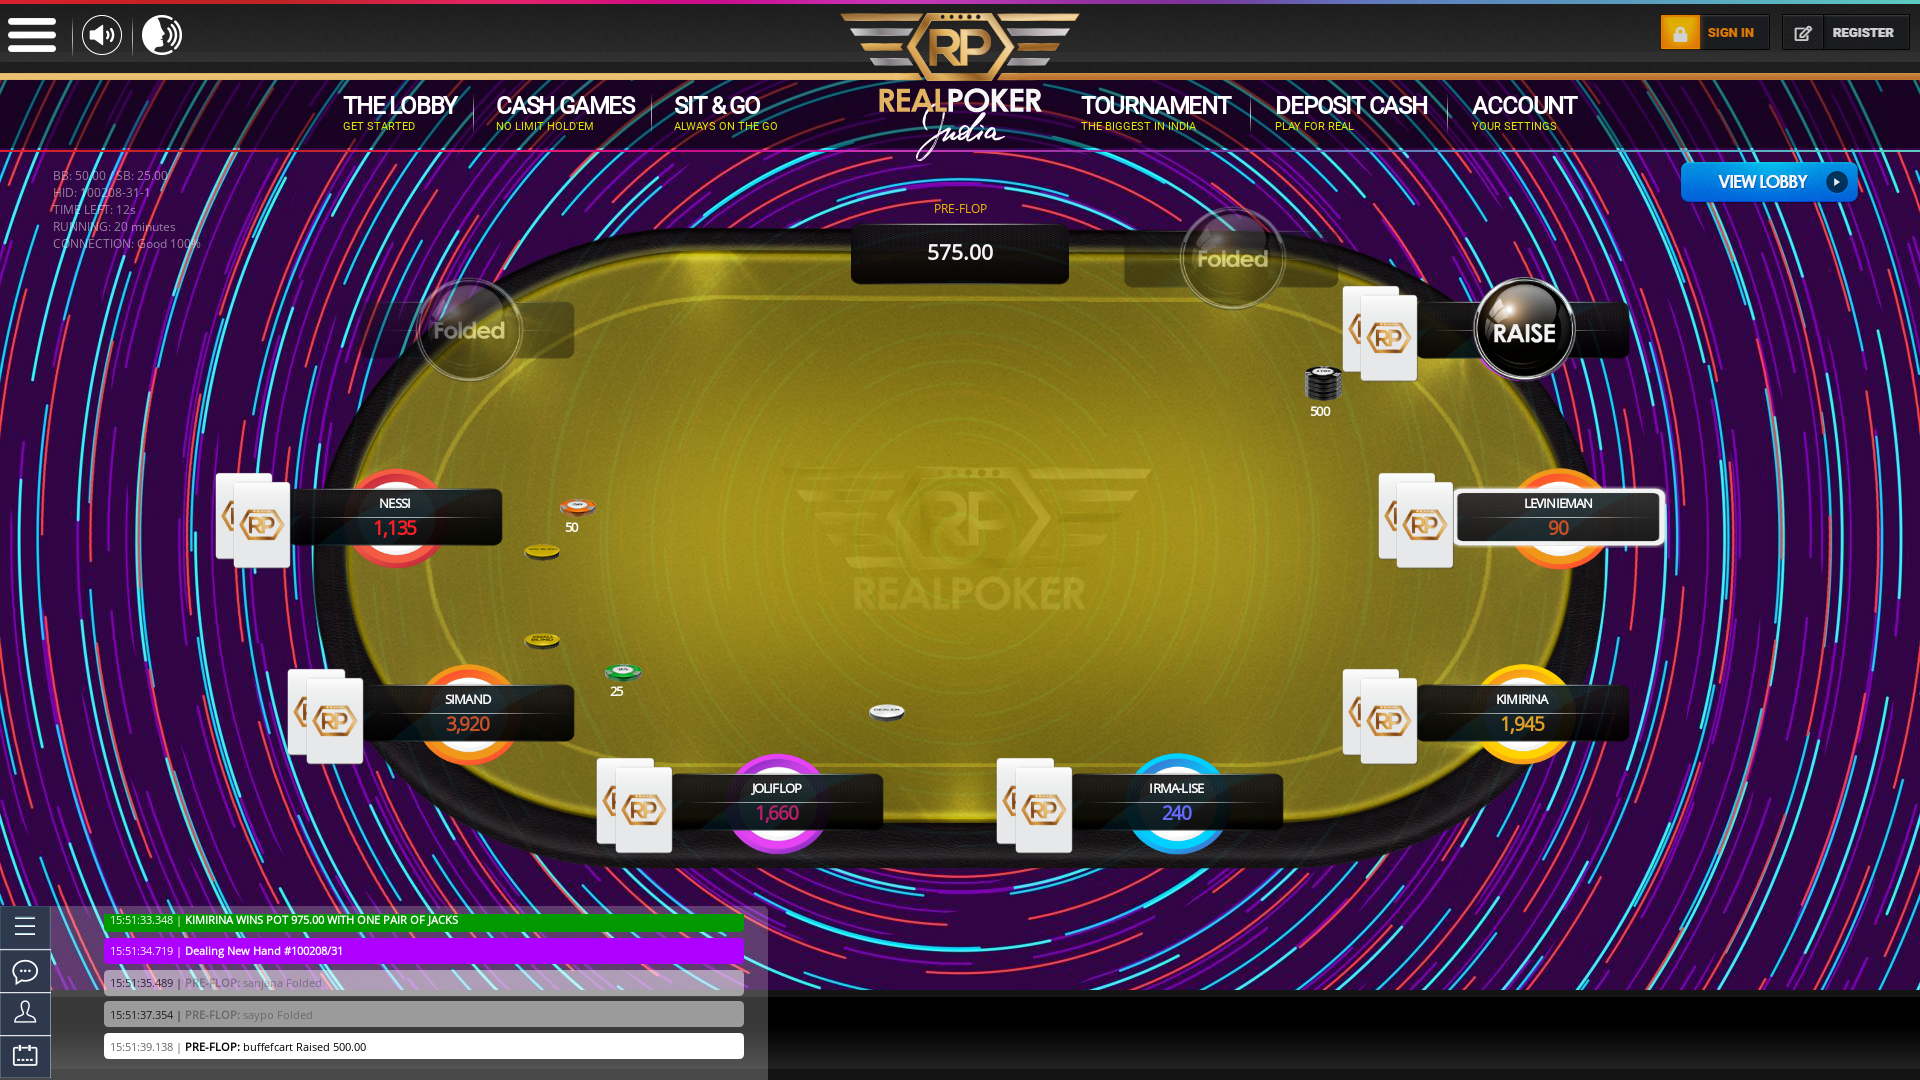 10 player texas holdem table at real poker with the table id 100208